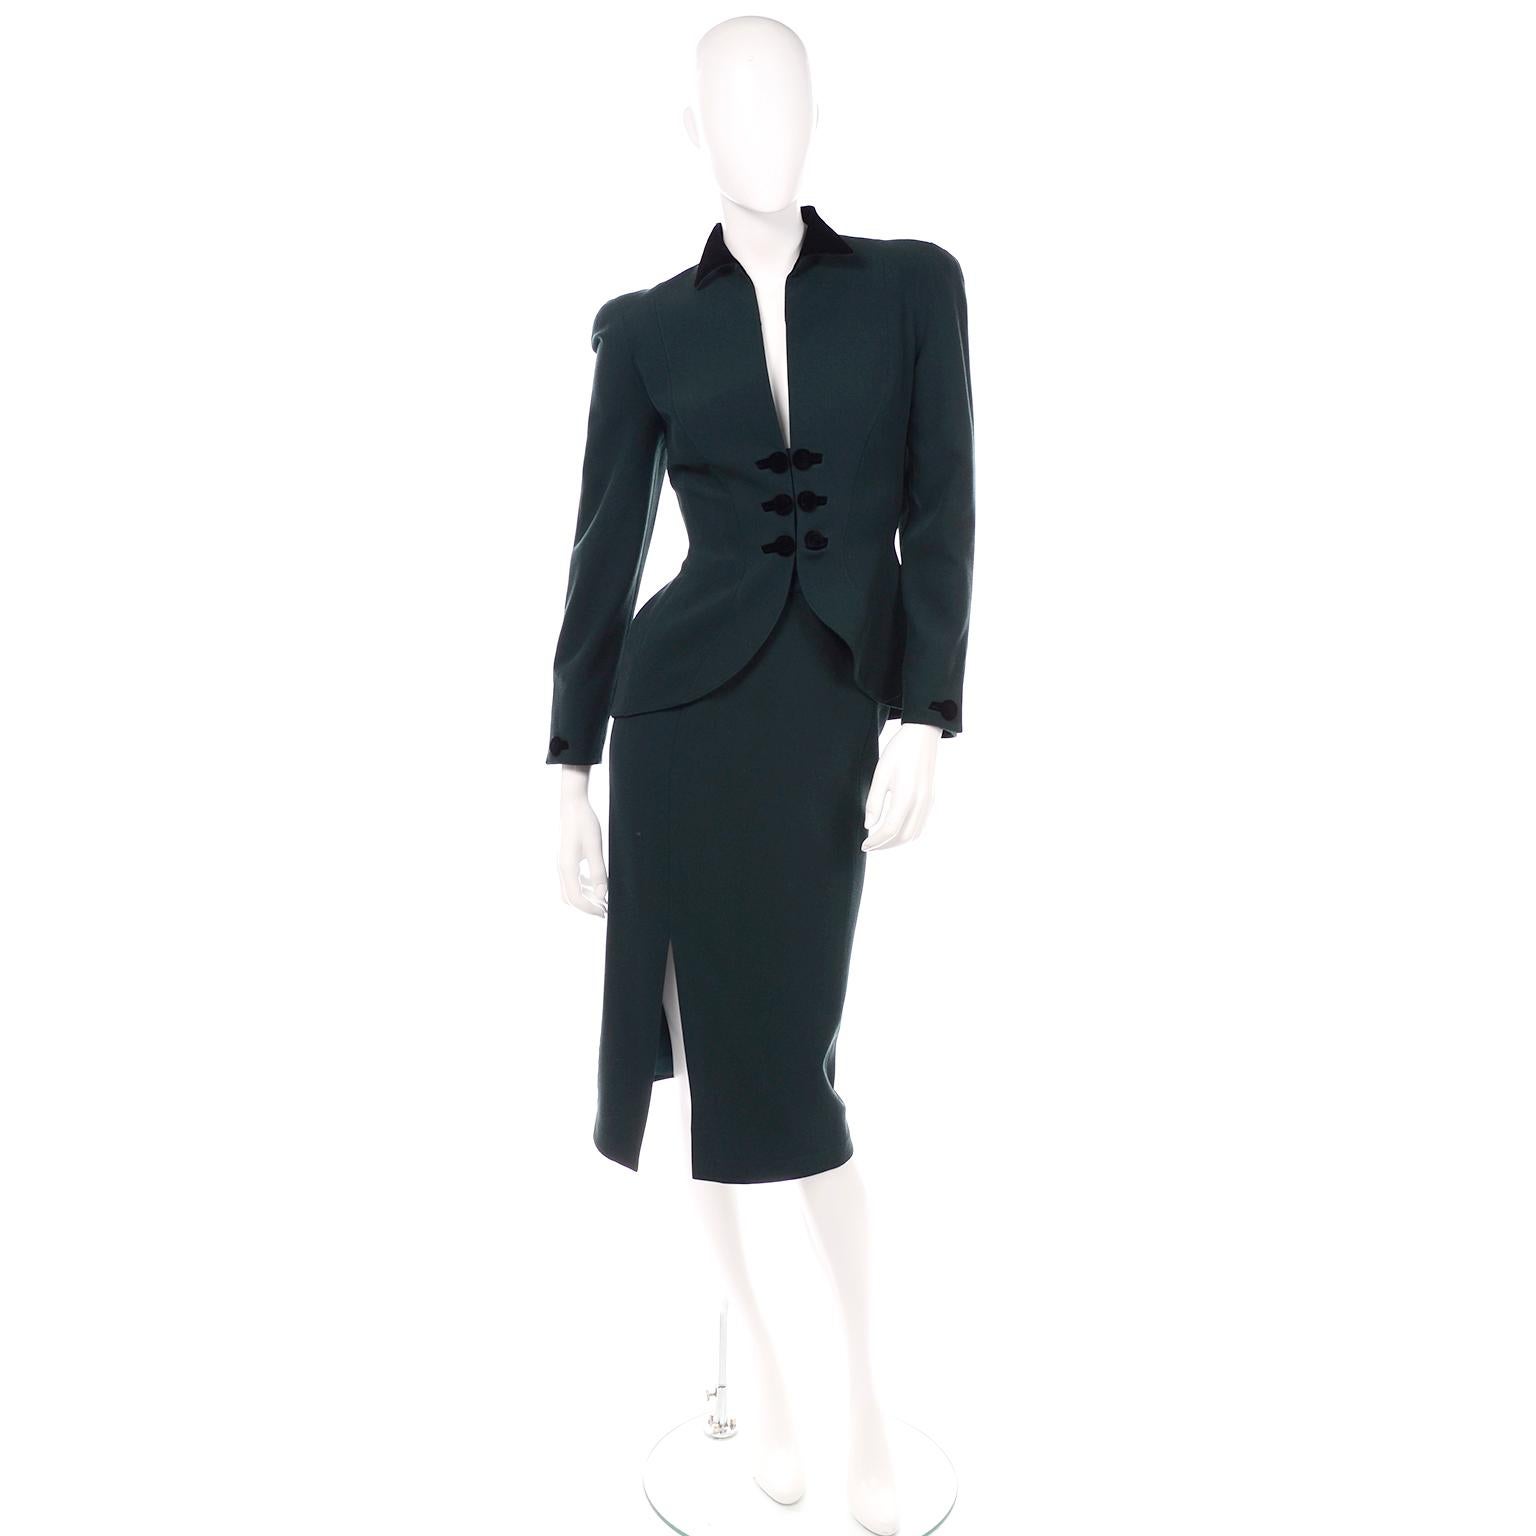 This vintage forest green wool Thierry Mugler 2 piece skirt suit is so spectacular! We love the front opening of the jacket with the double black velvet covered buttons and velvet lined pointed collar. This suit is a signature Mugler shape and